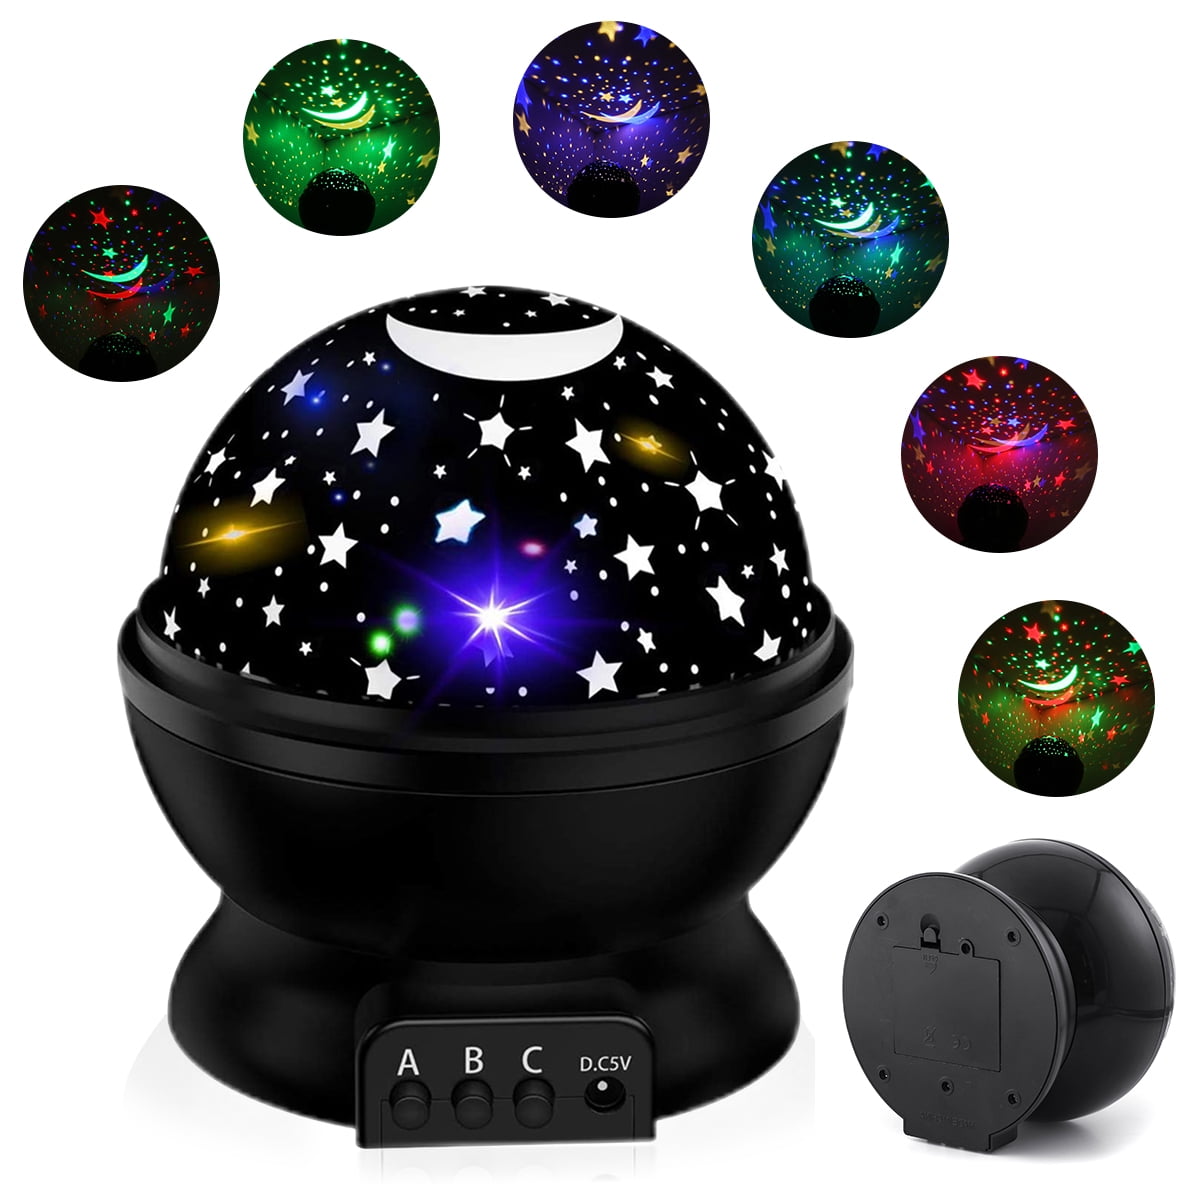 Details about   Galaxy Star Moon Night Lamp LED Projector Light with Digital Alarm Clock Gift 